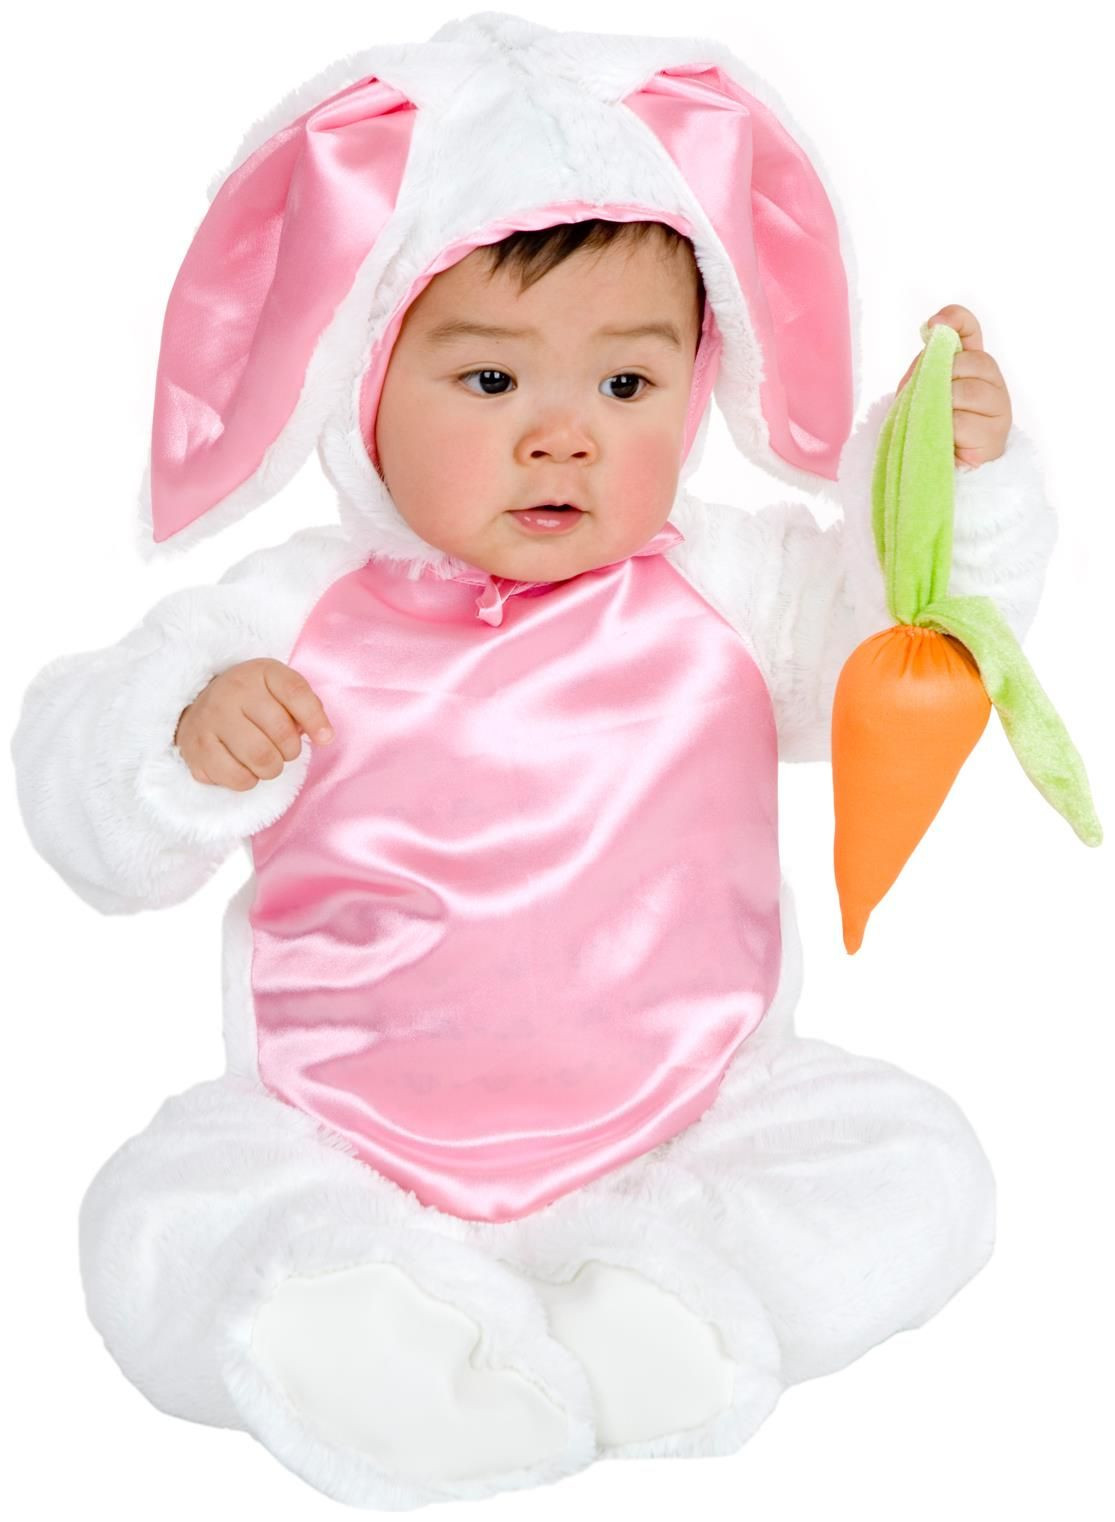 Easter Costume Ideas
 Pin on Easter Bunny Costumes Ideas